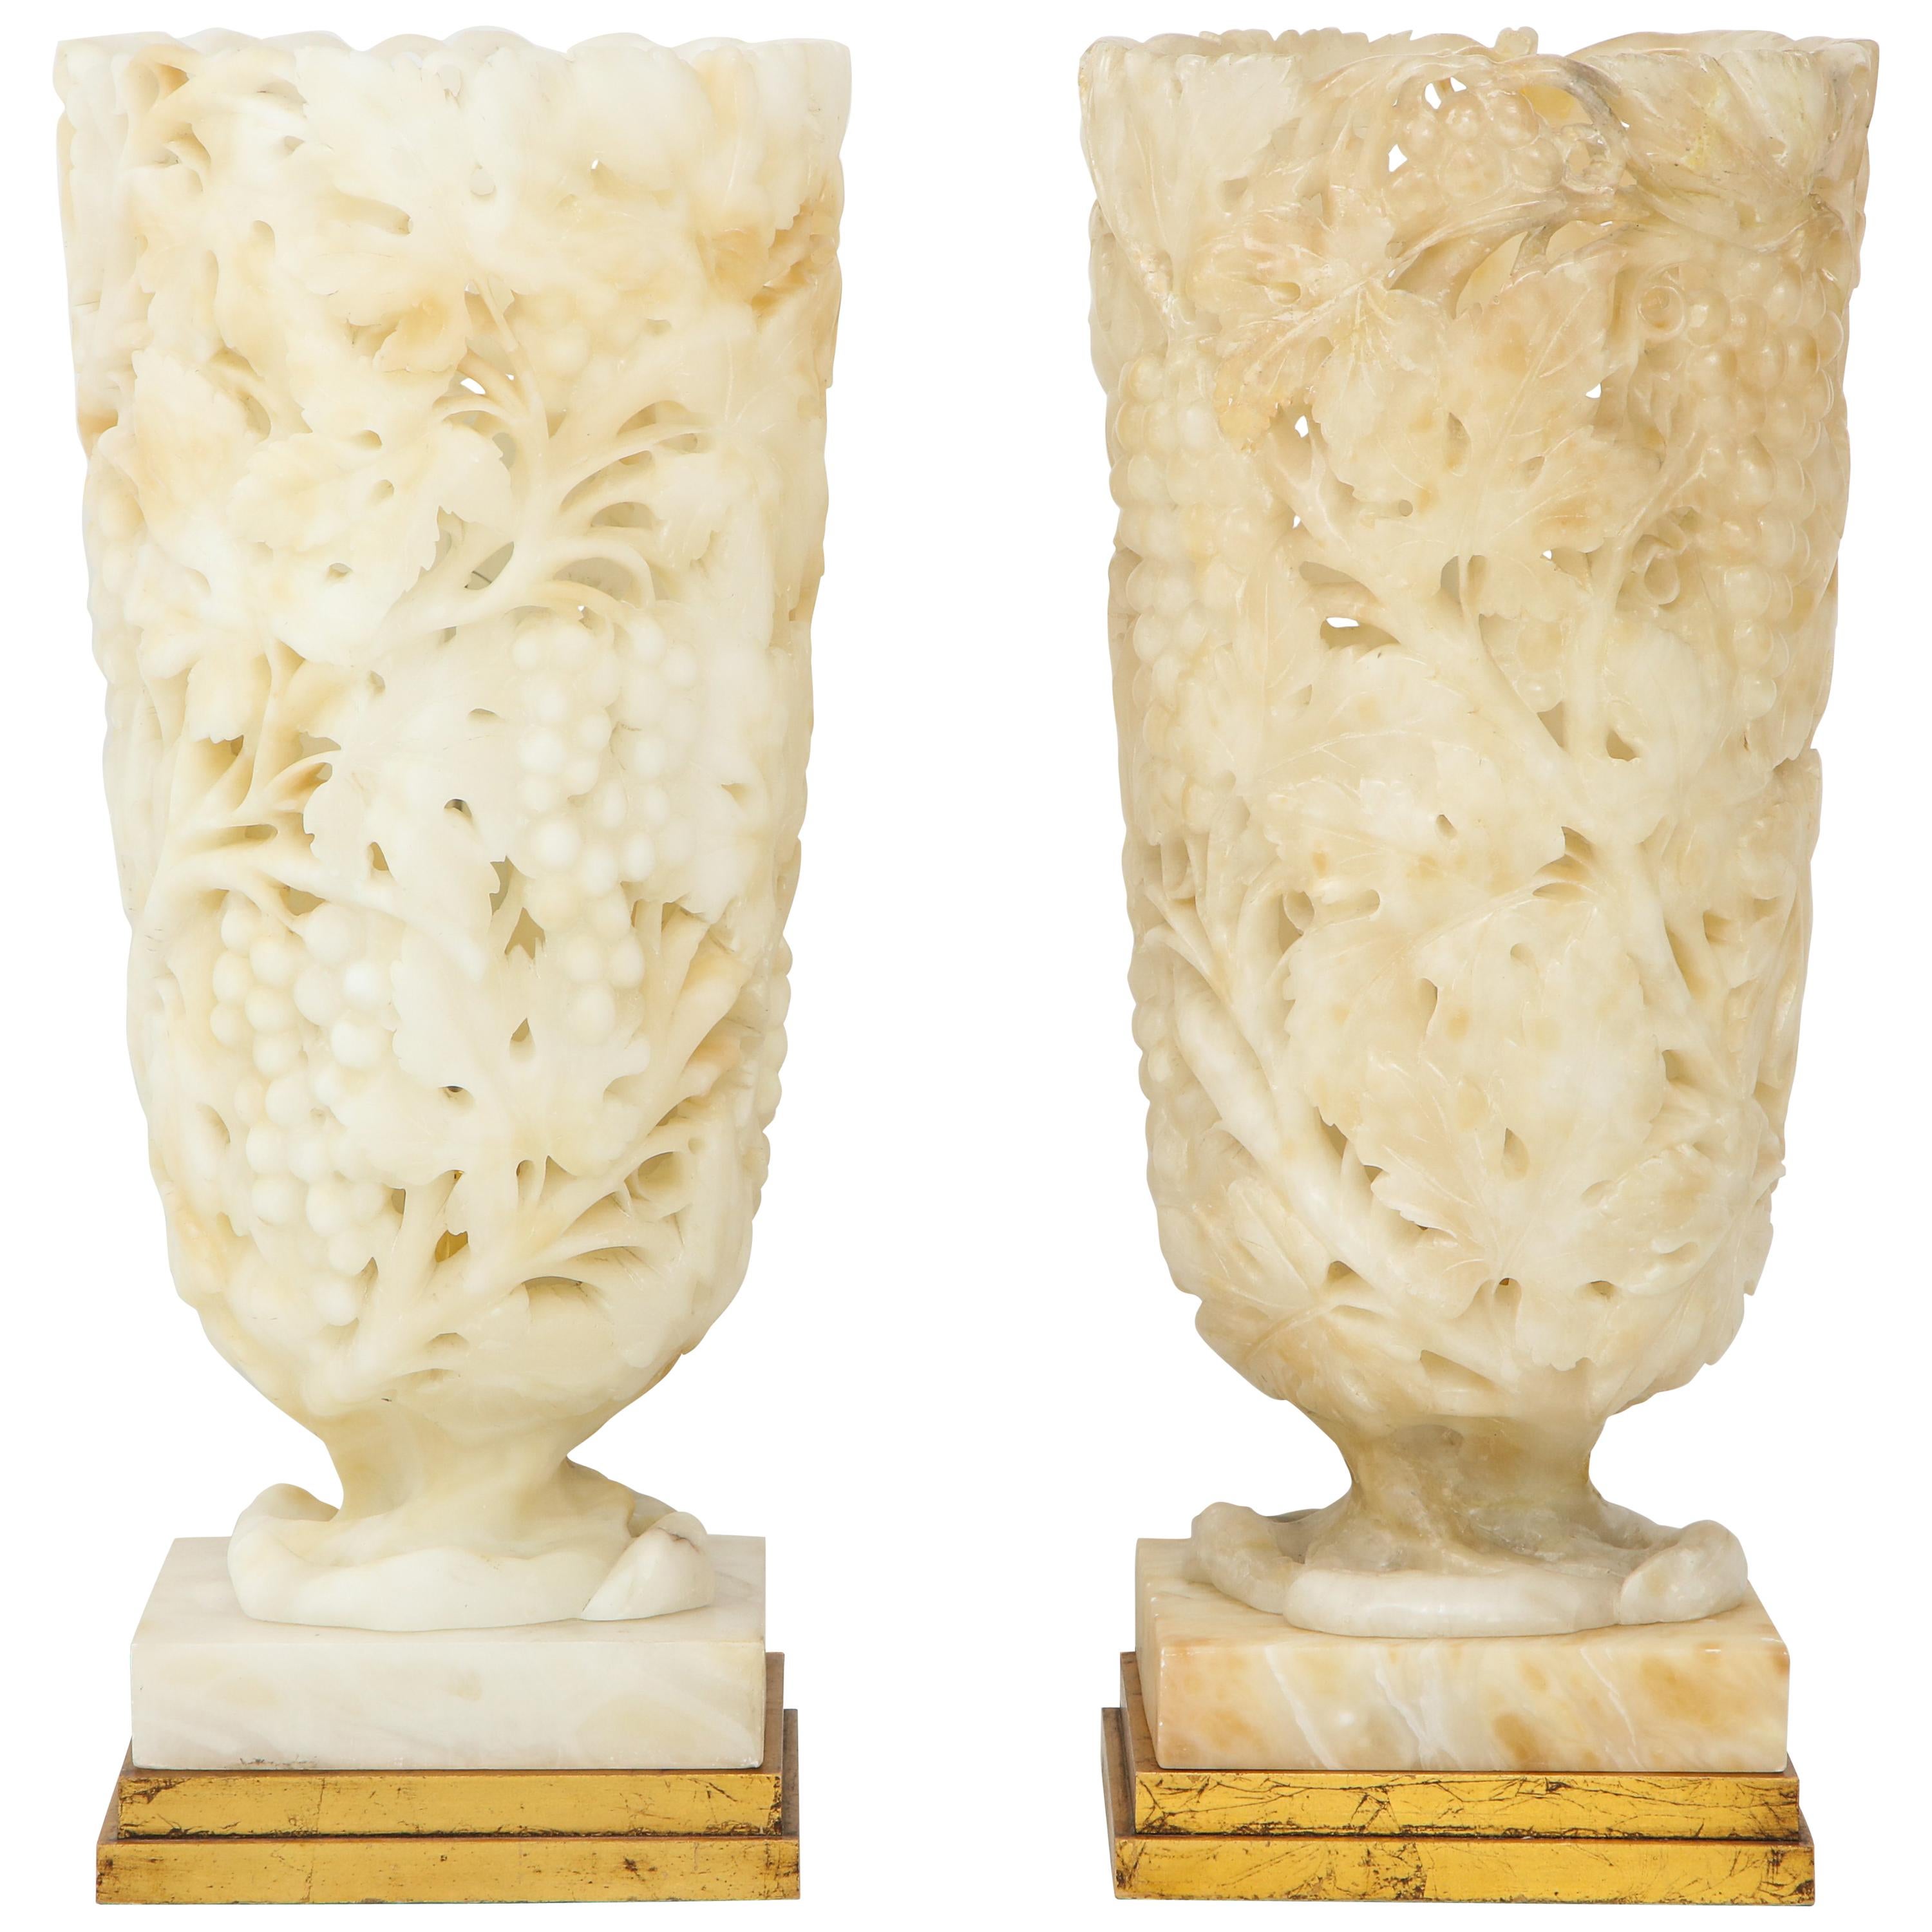 Exquisite Pair of Large Carved Alabaster Lamps